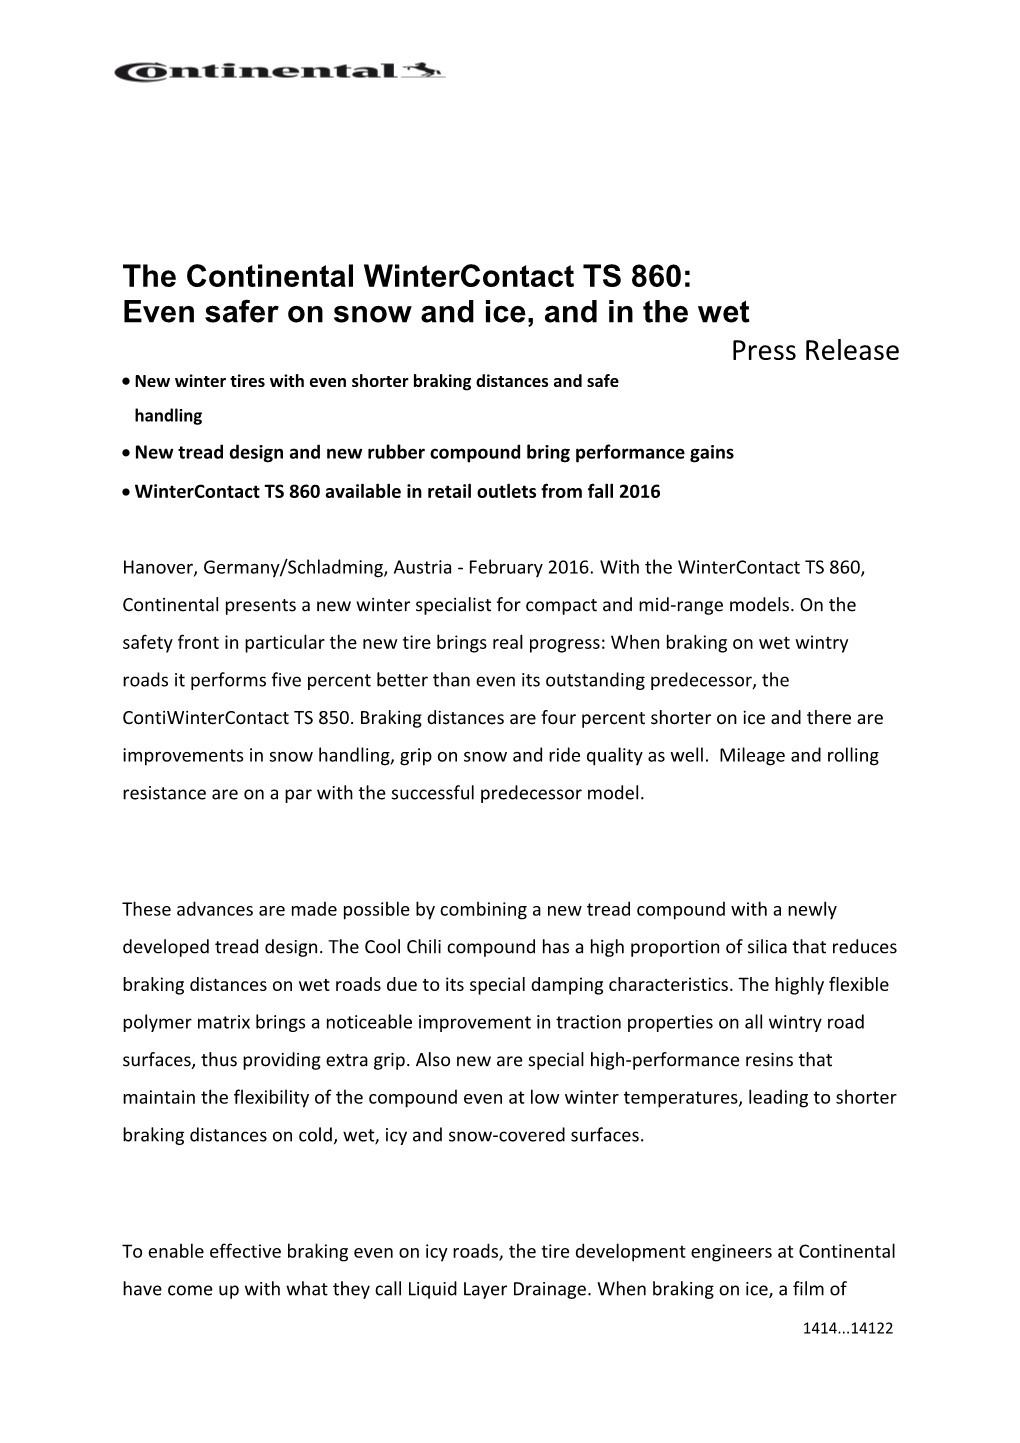 The Continental Wintercontact TS 860: Even Safer on Snow and Ice, and in the Wet